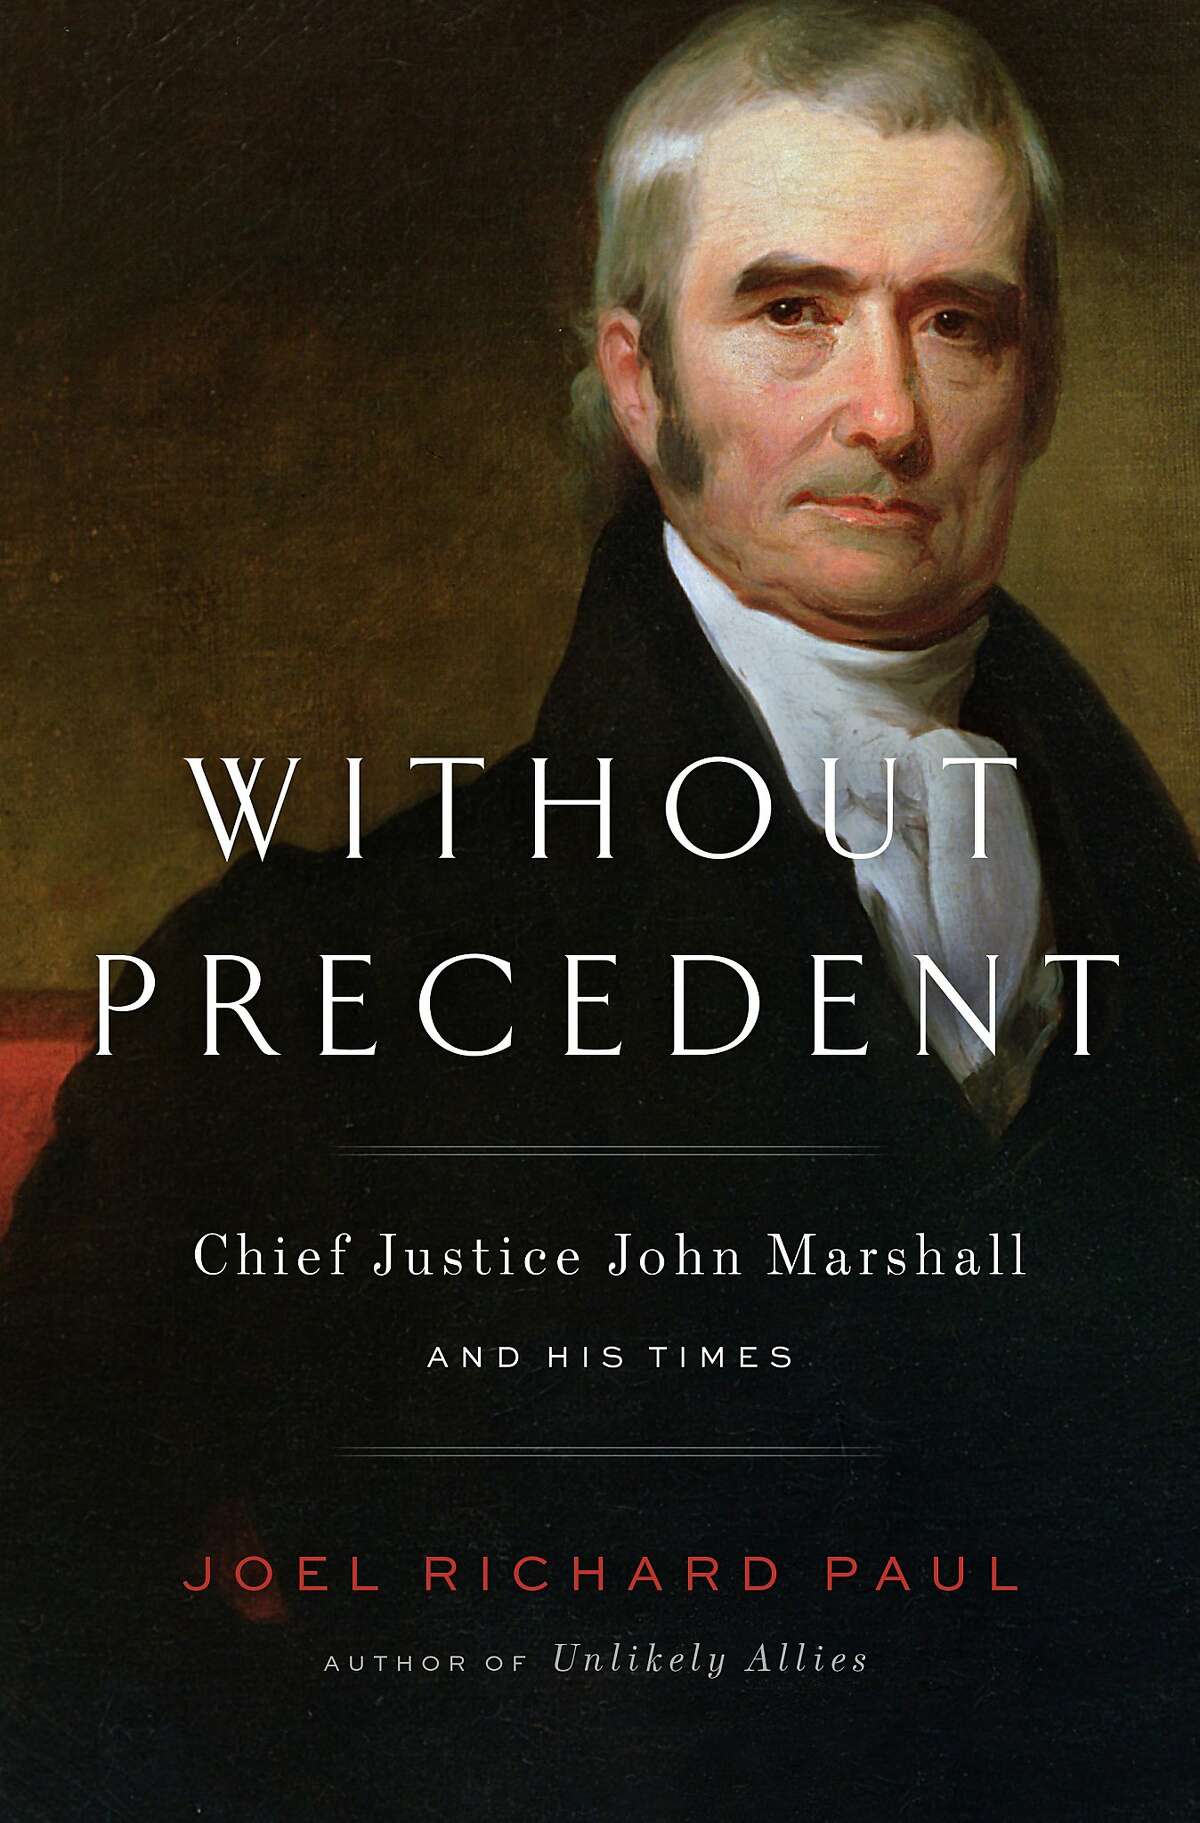 "Without Precedent"